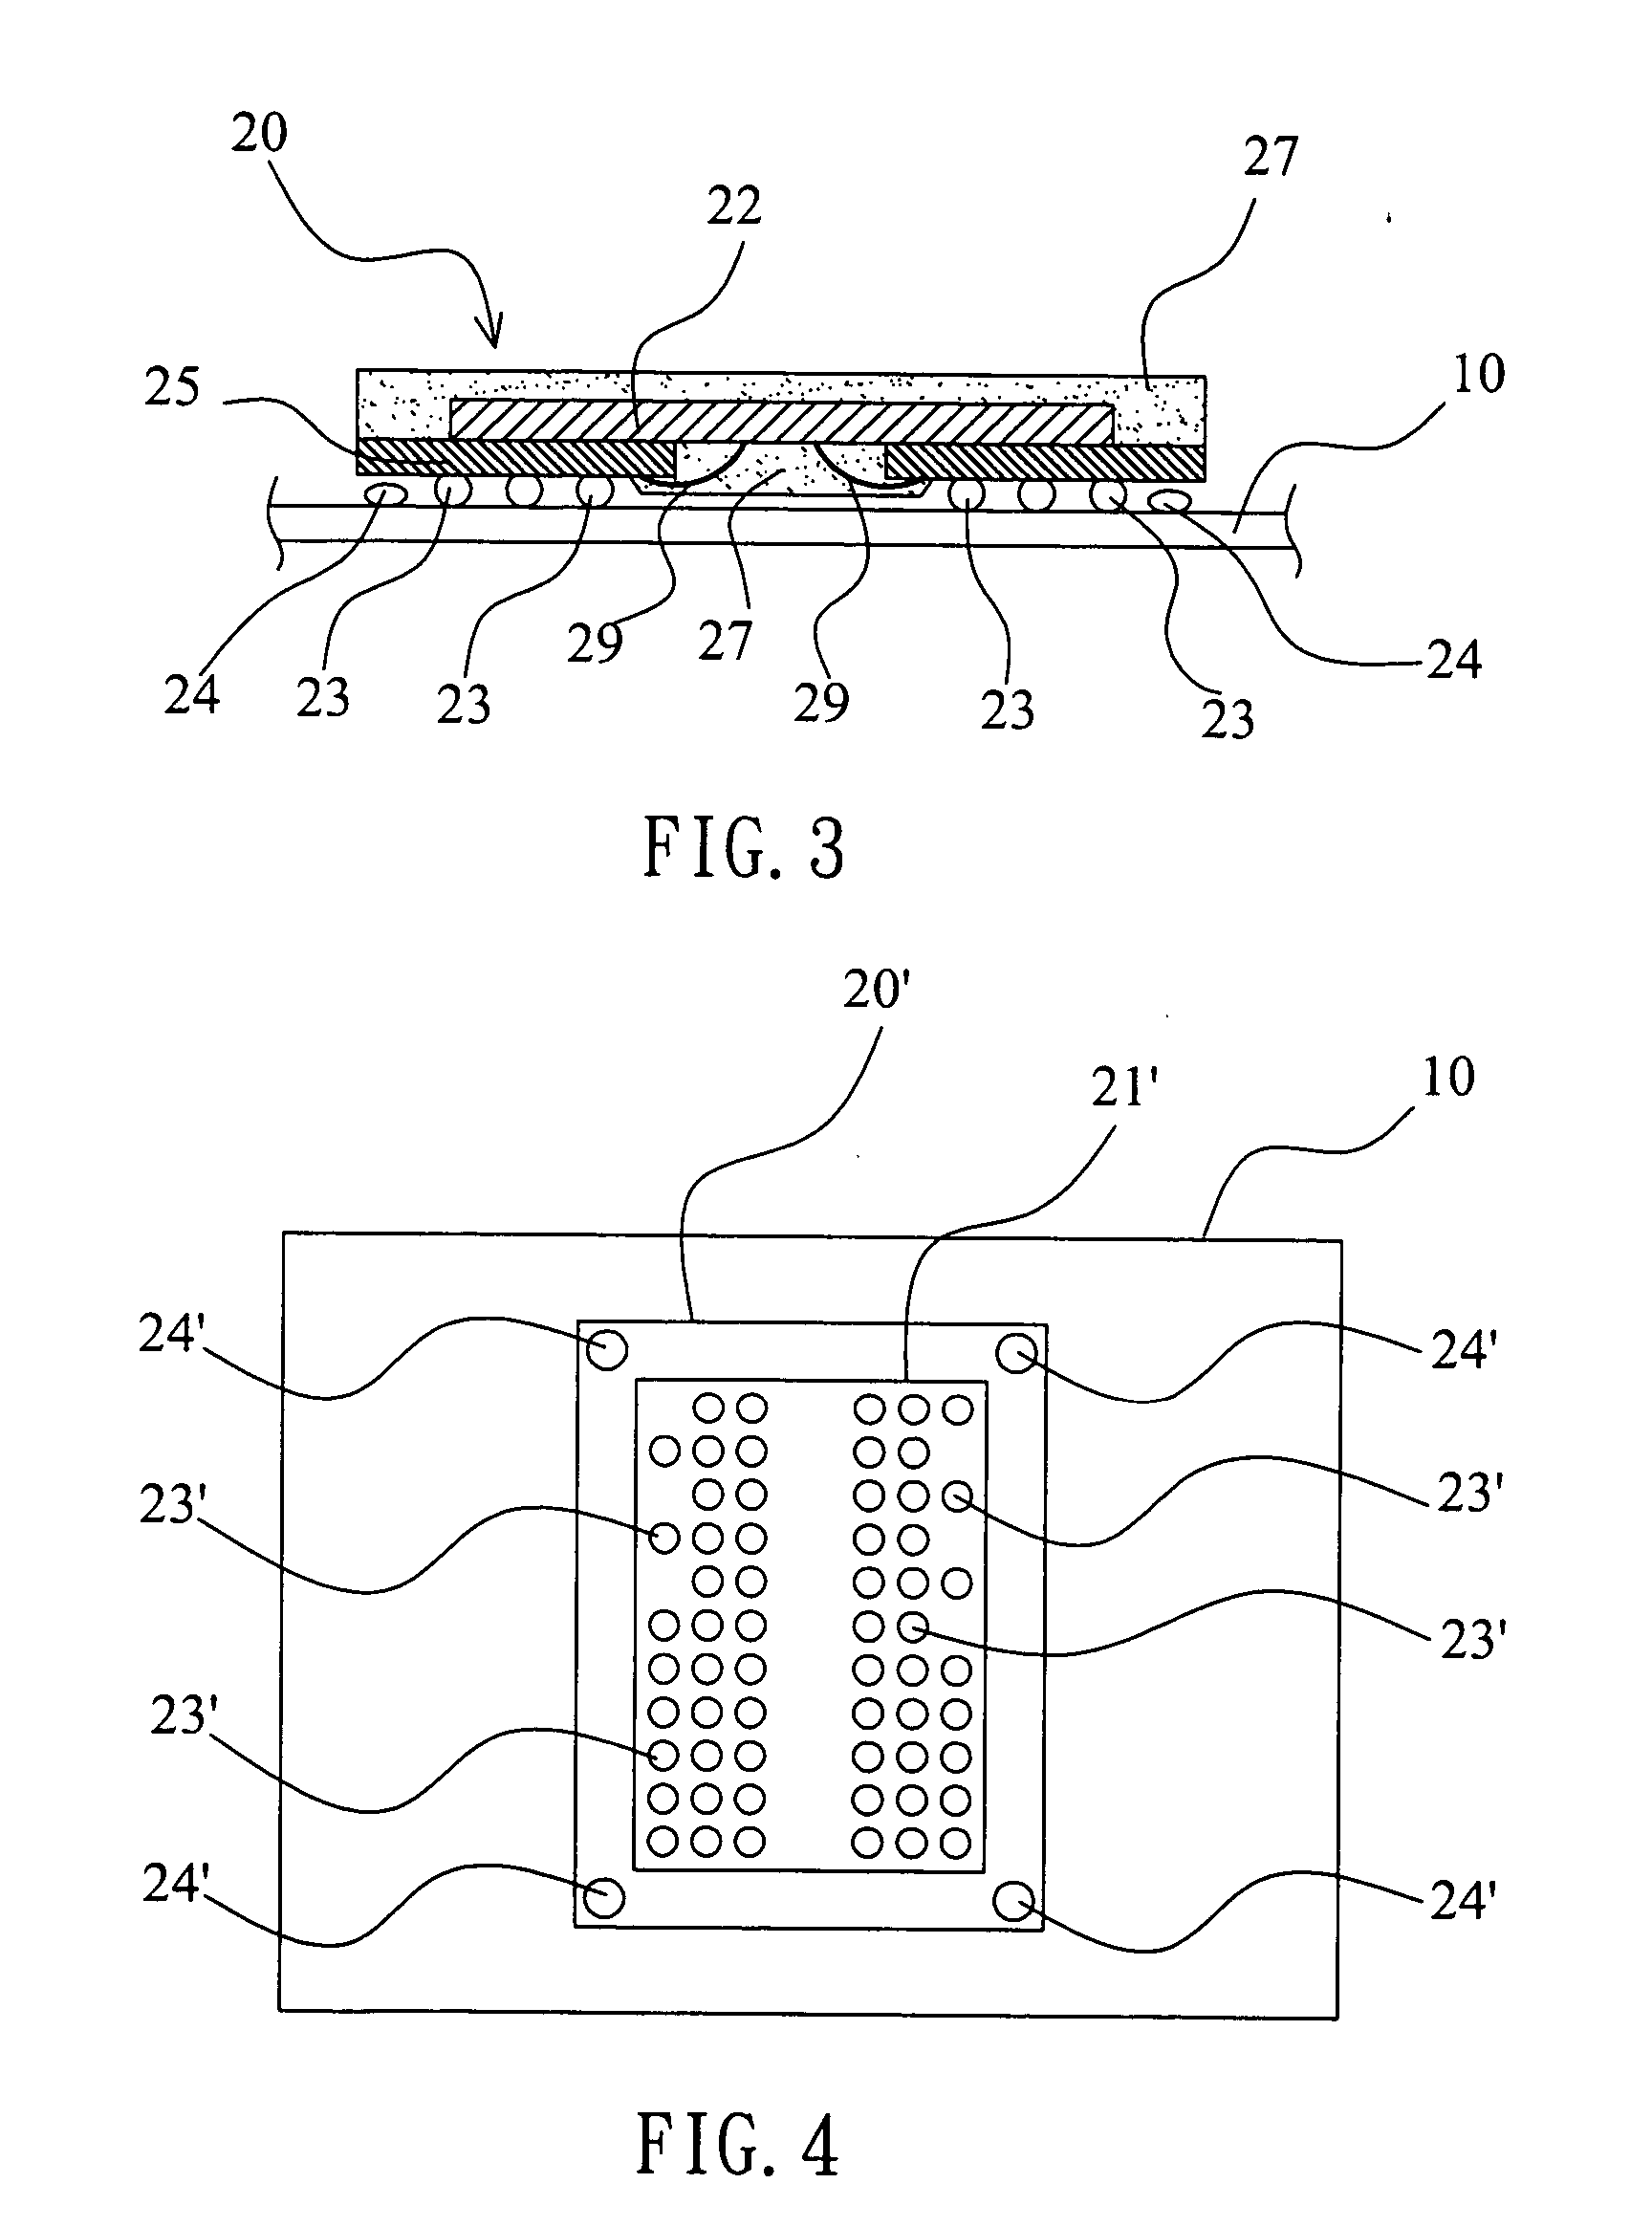 Structure of electronic package and printed circuit board thereof